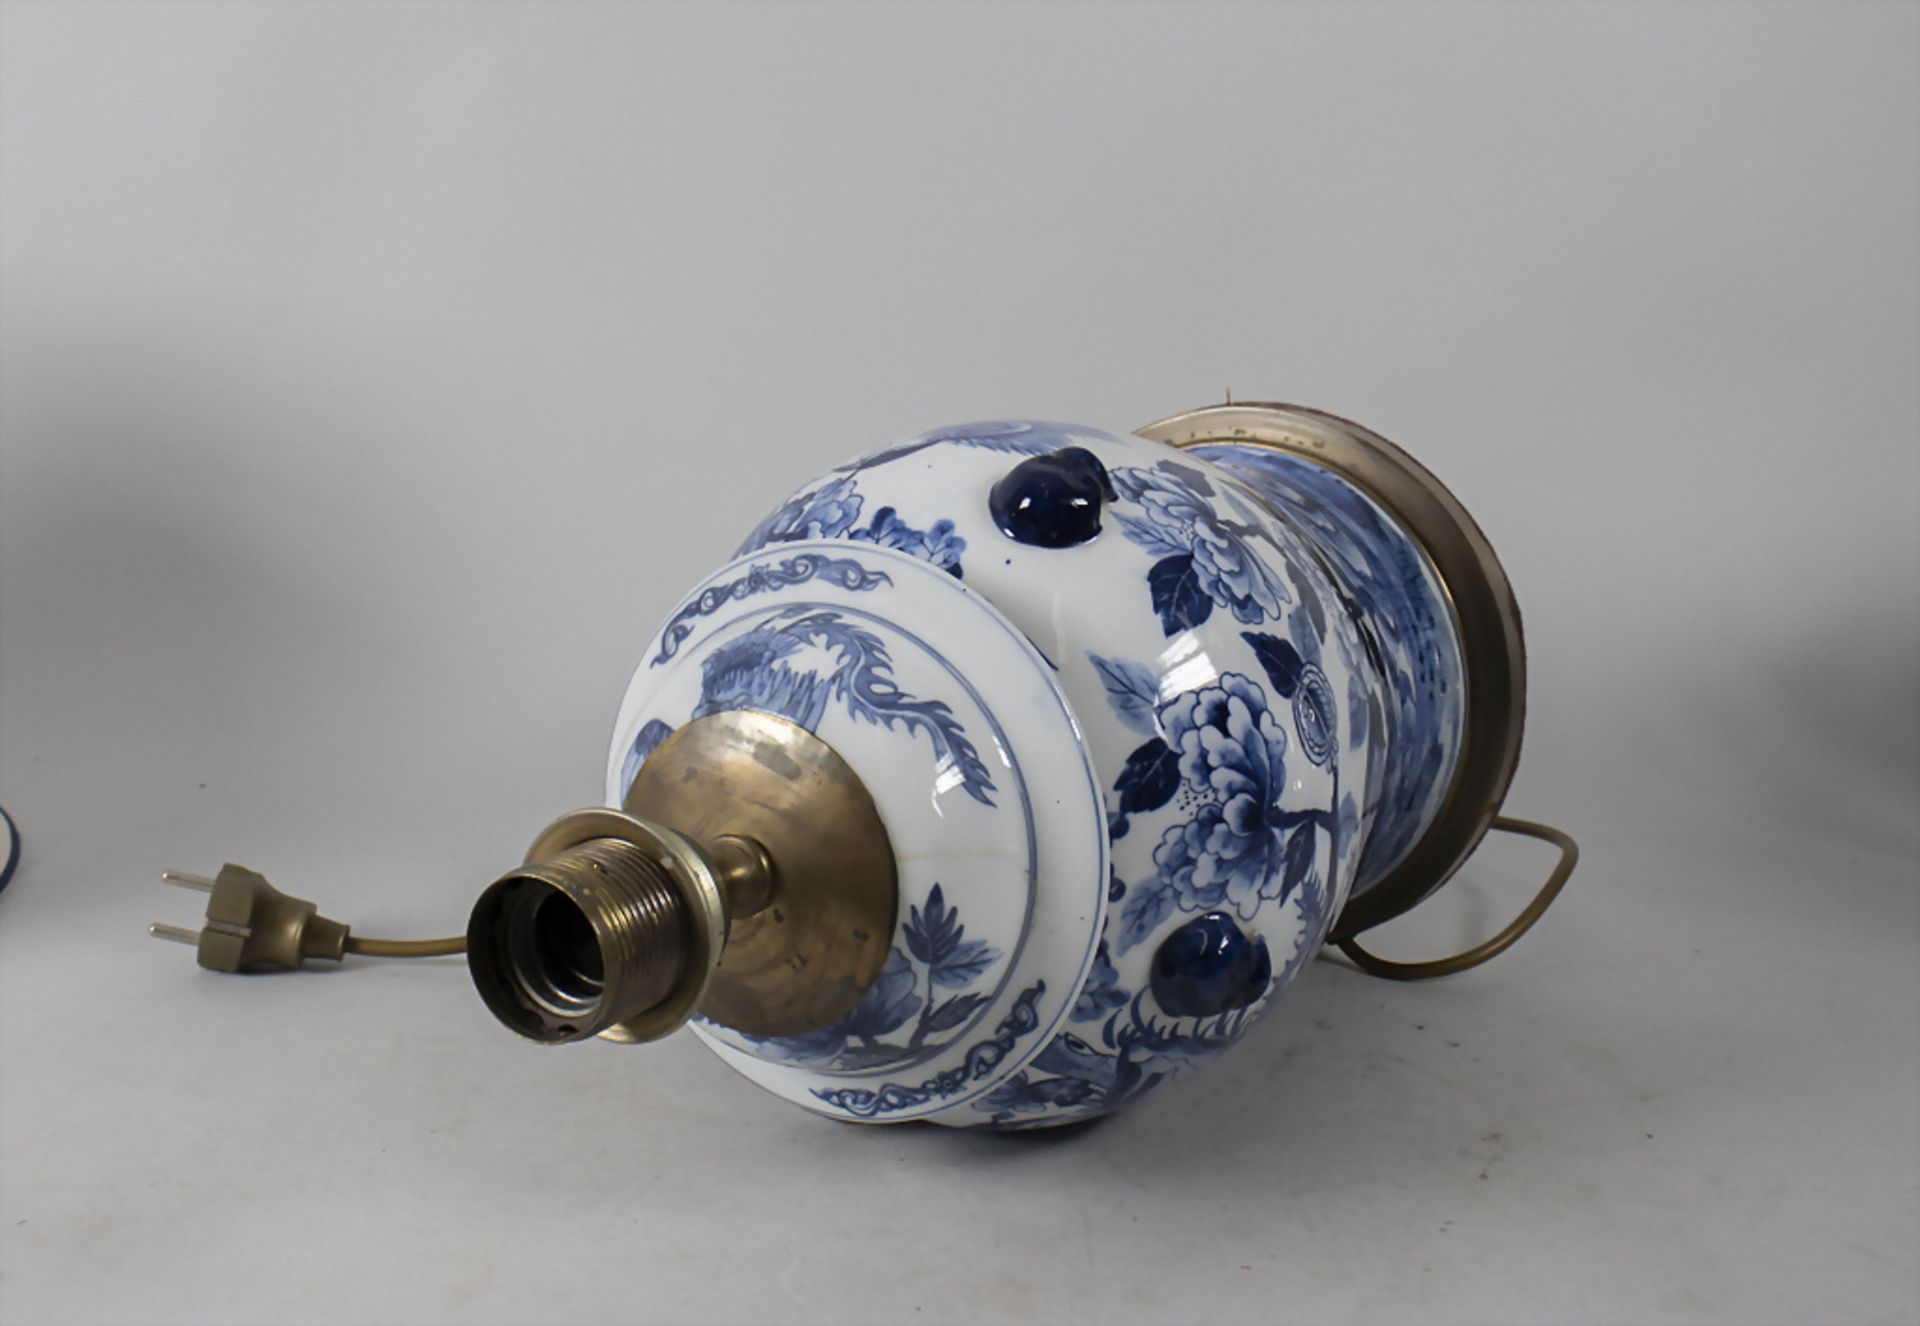 Deckelvase als Lampenfuß / A lidded vase as lamp base, China, Qing-Dynastie, wohl Guangxu ... - Image 6 of 8